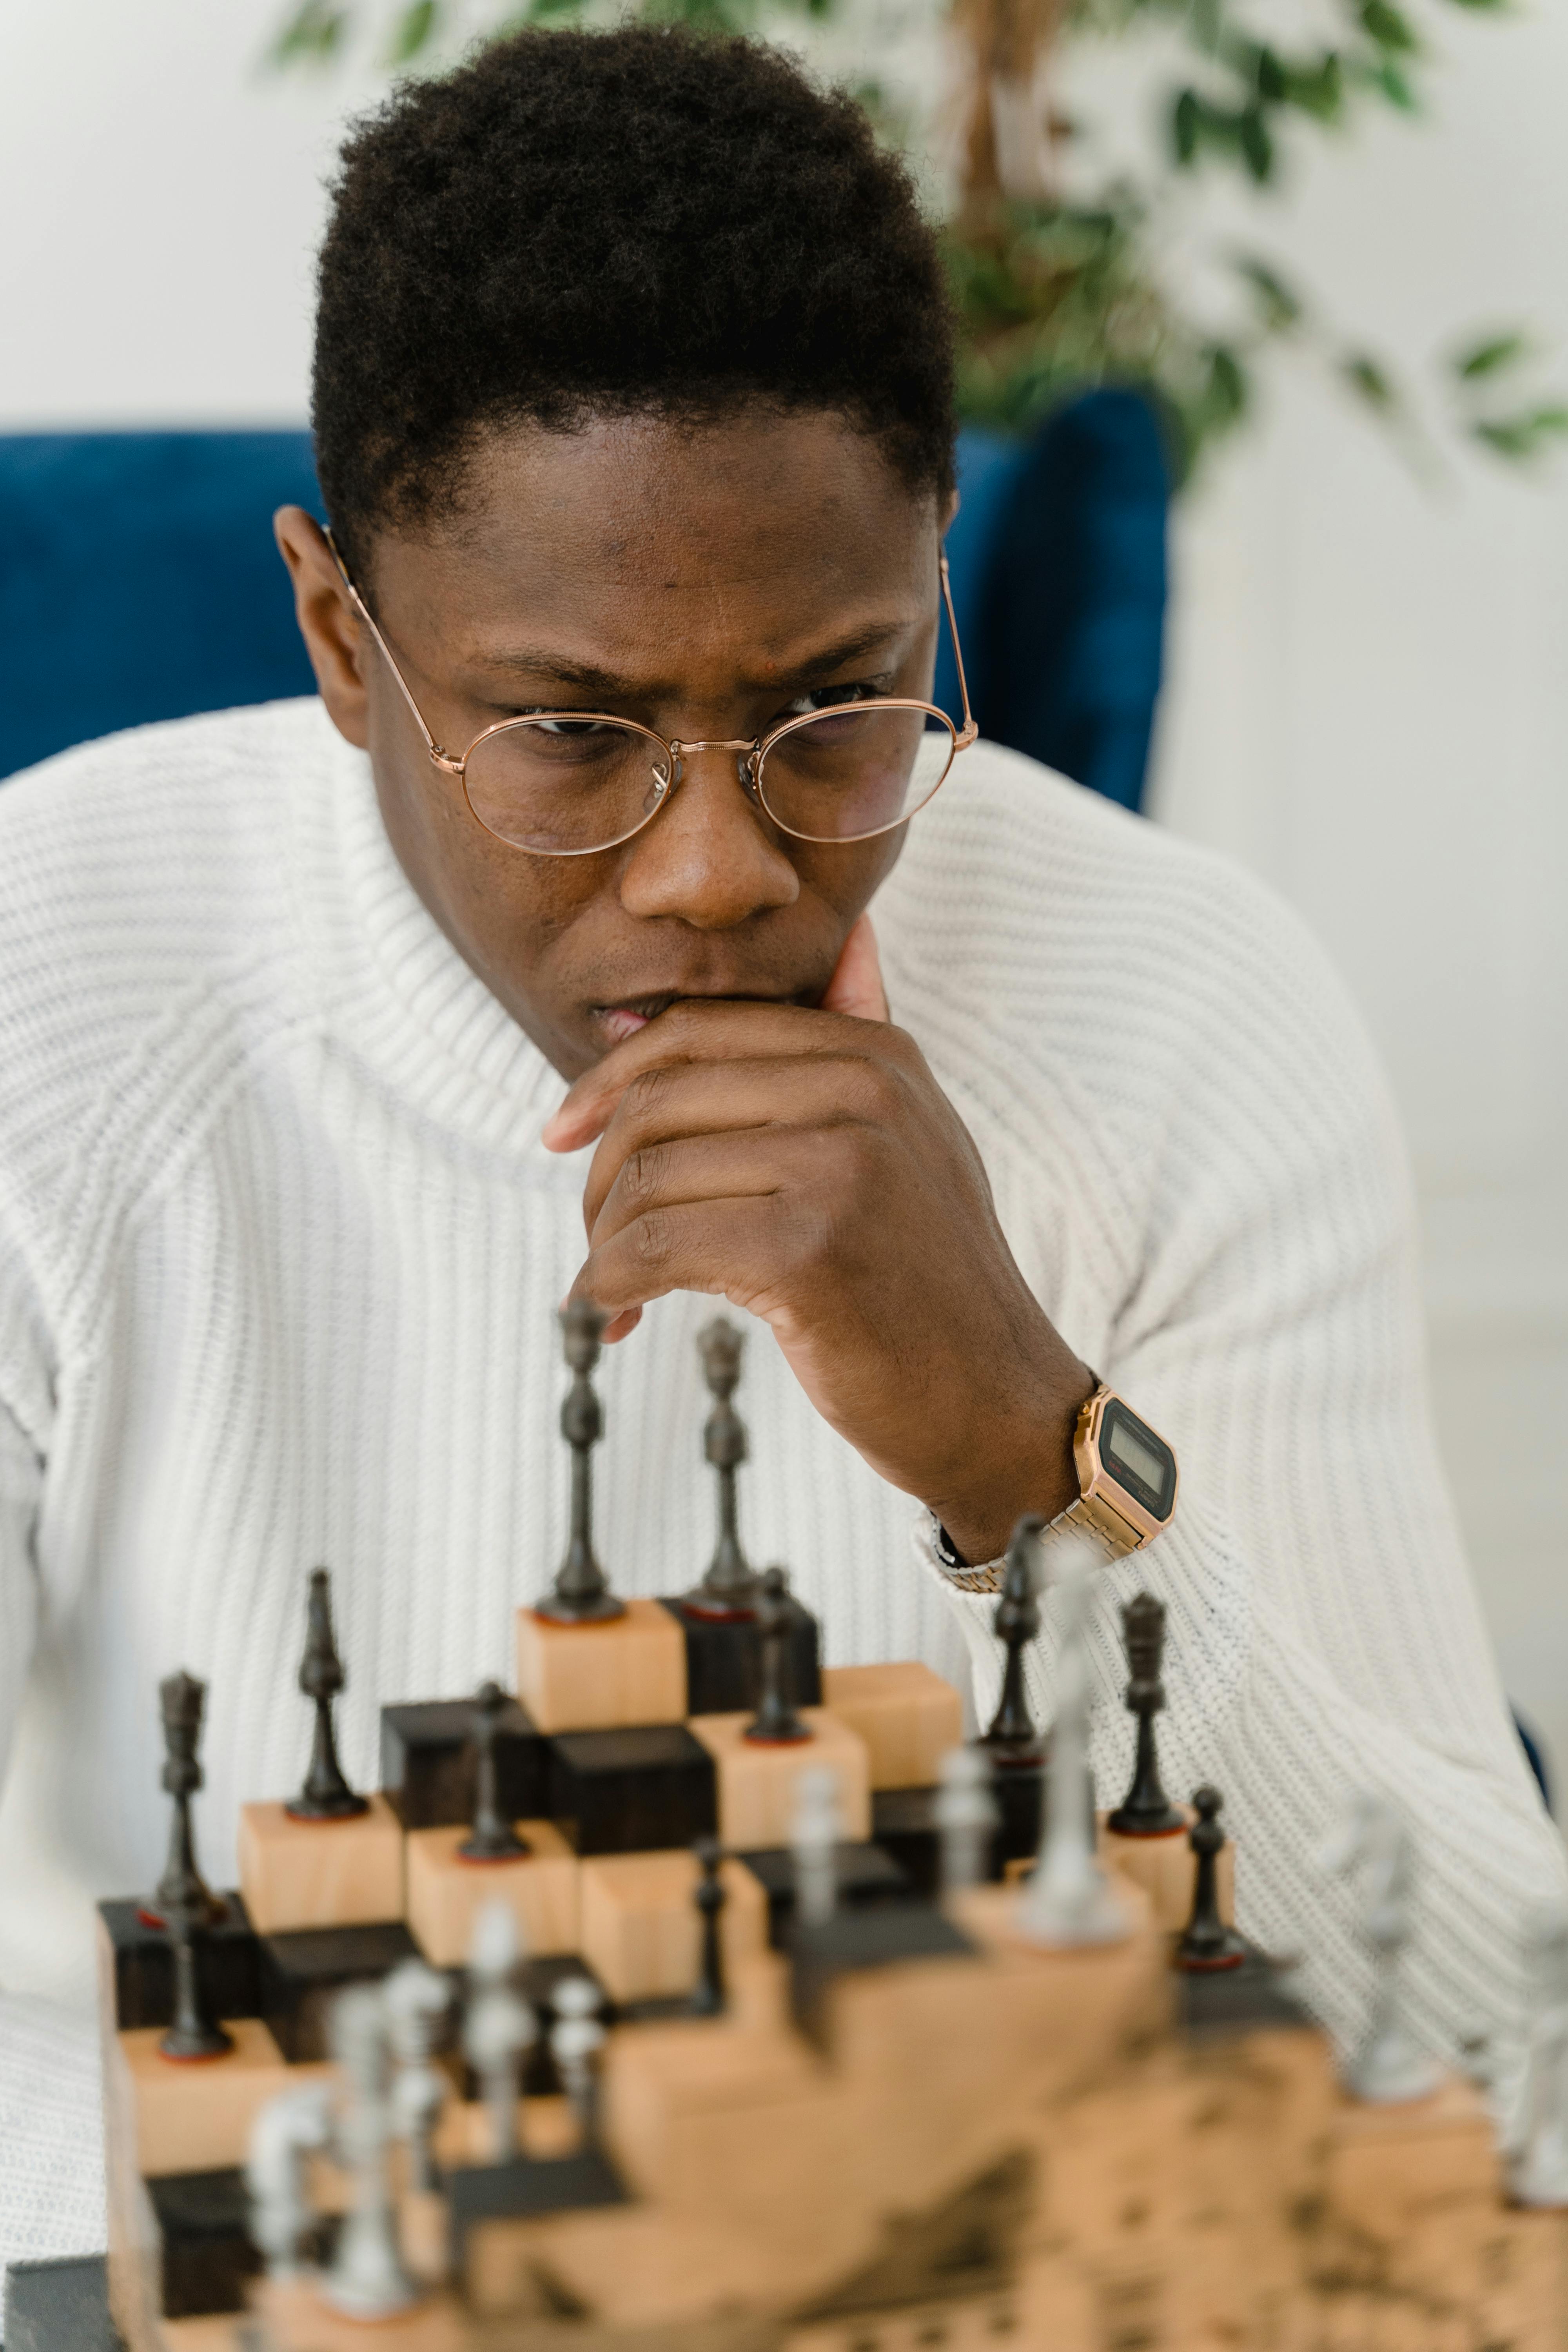 Blonde Caucasian Boy Thinking of a Next Chess Move Playing Chess. Strategy,  Planning Concept Stock Image - Image of queen, people: 207341503